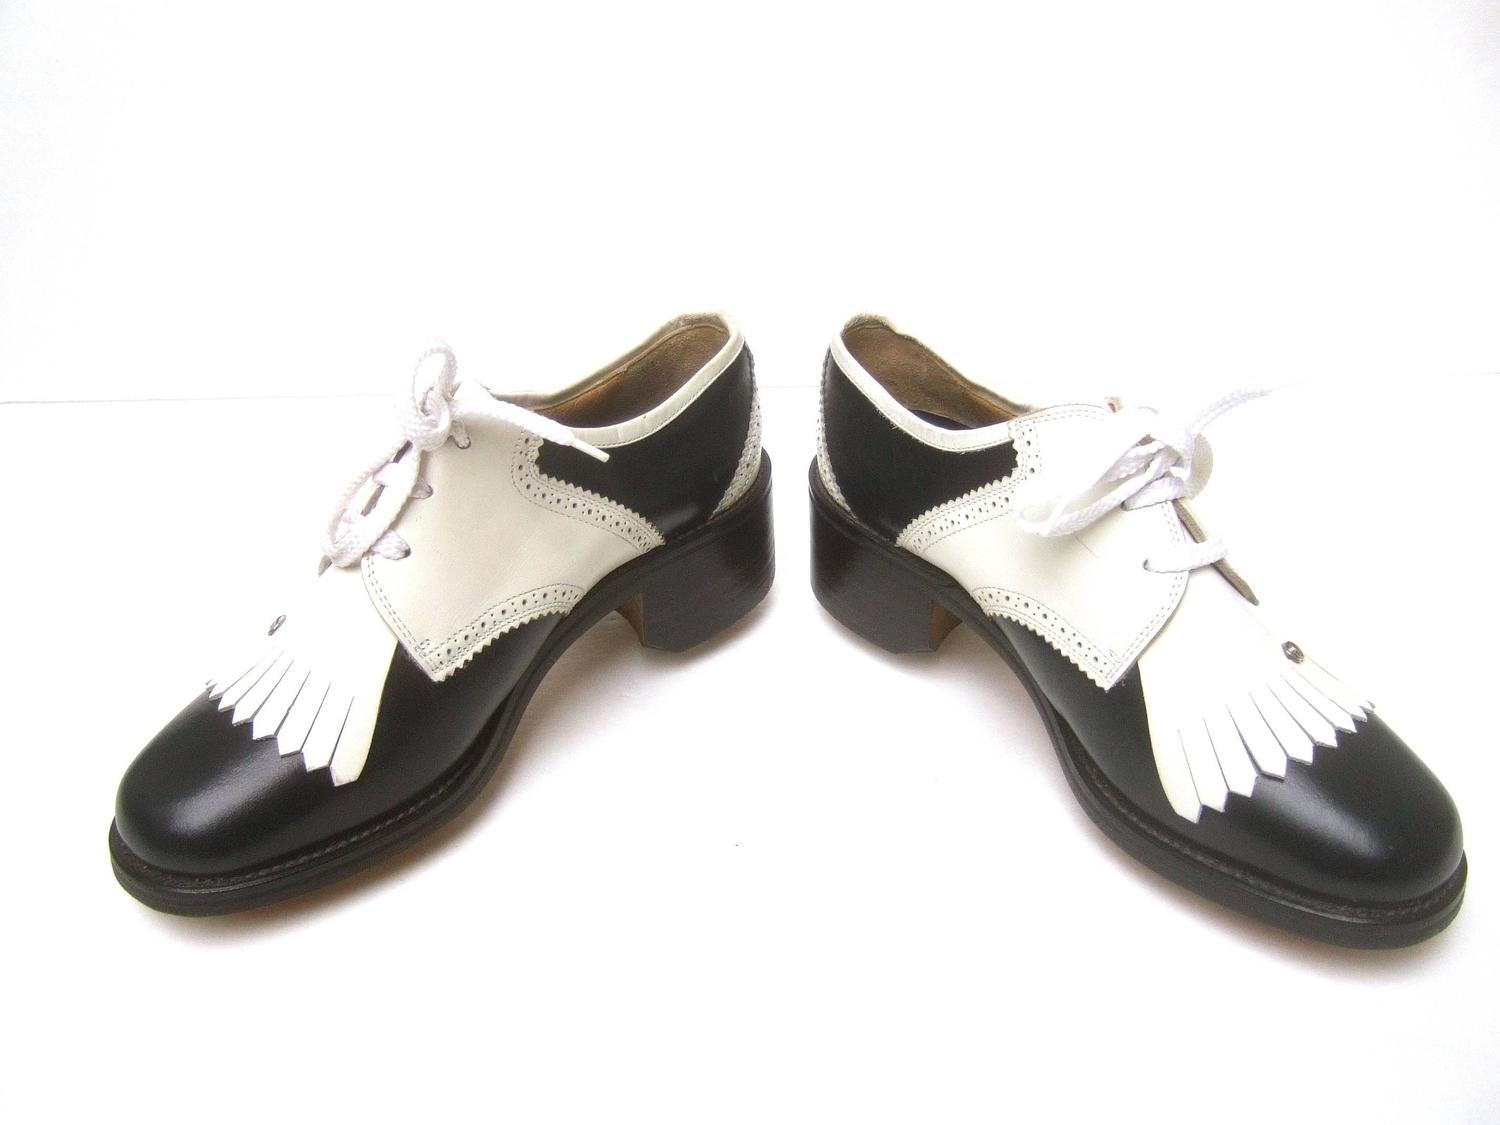 Gucci Womens Rare Leather Brogue Golf Shoes c 1980s For Sale at 1stdibs